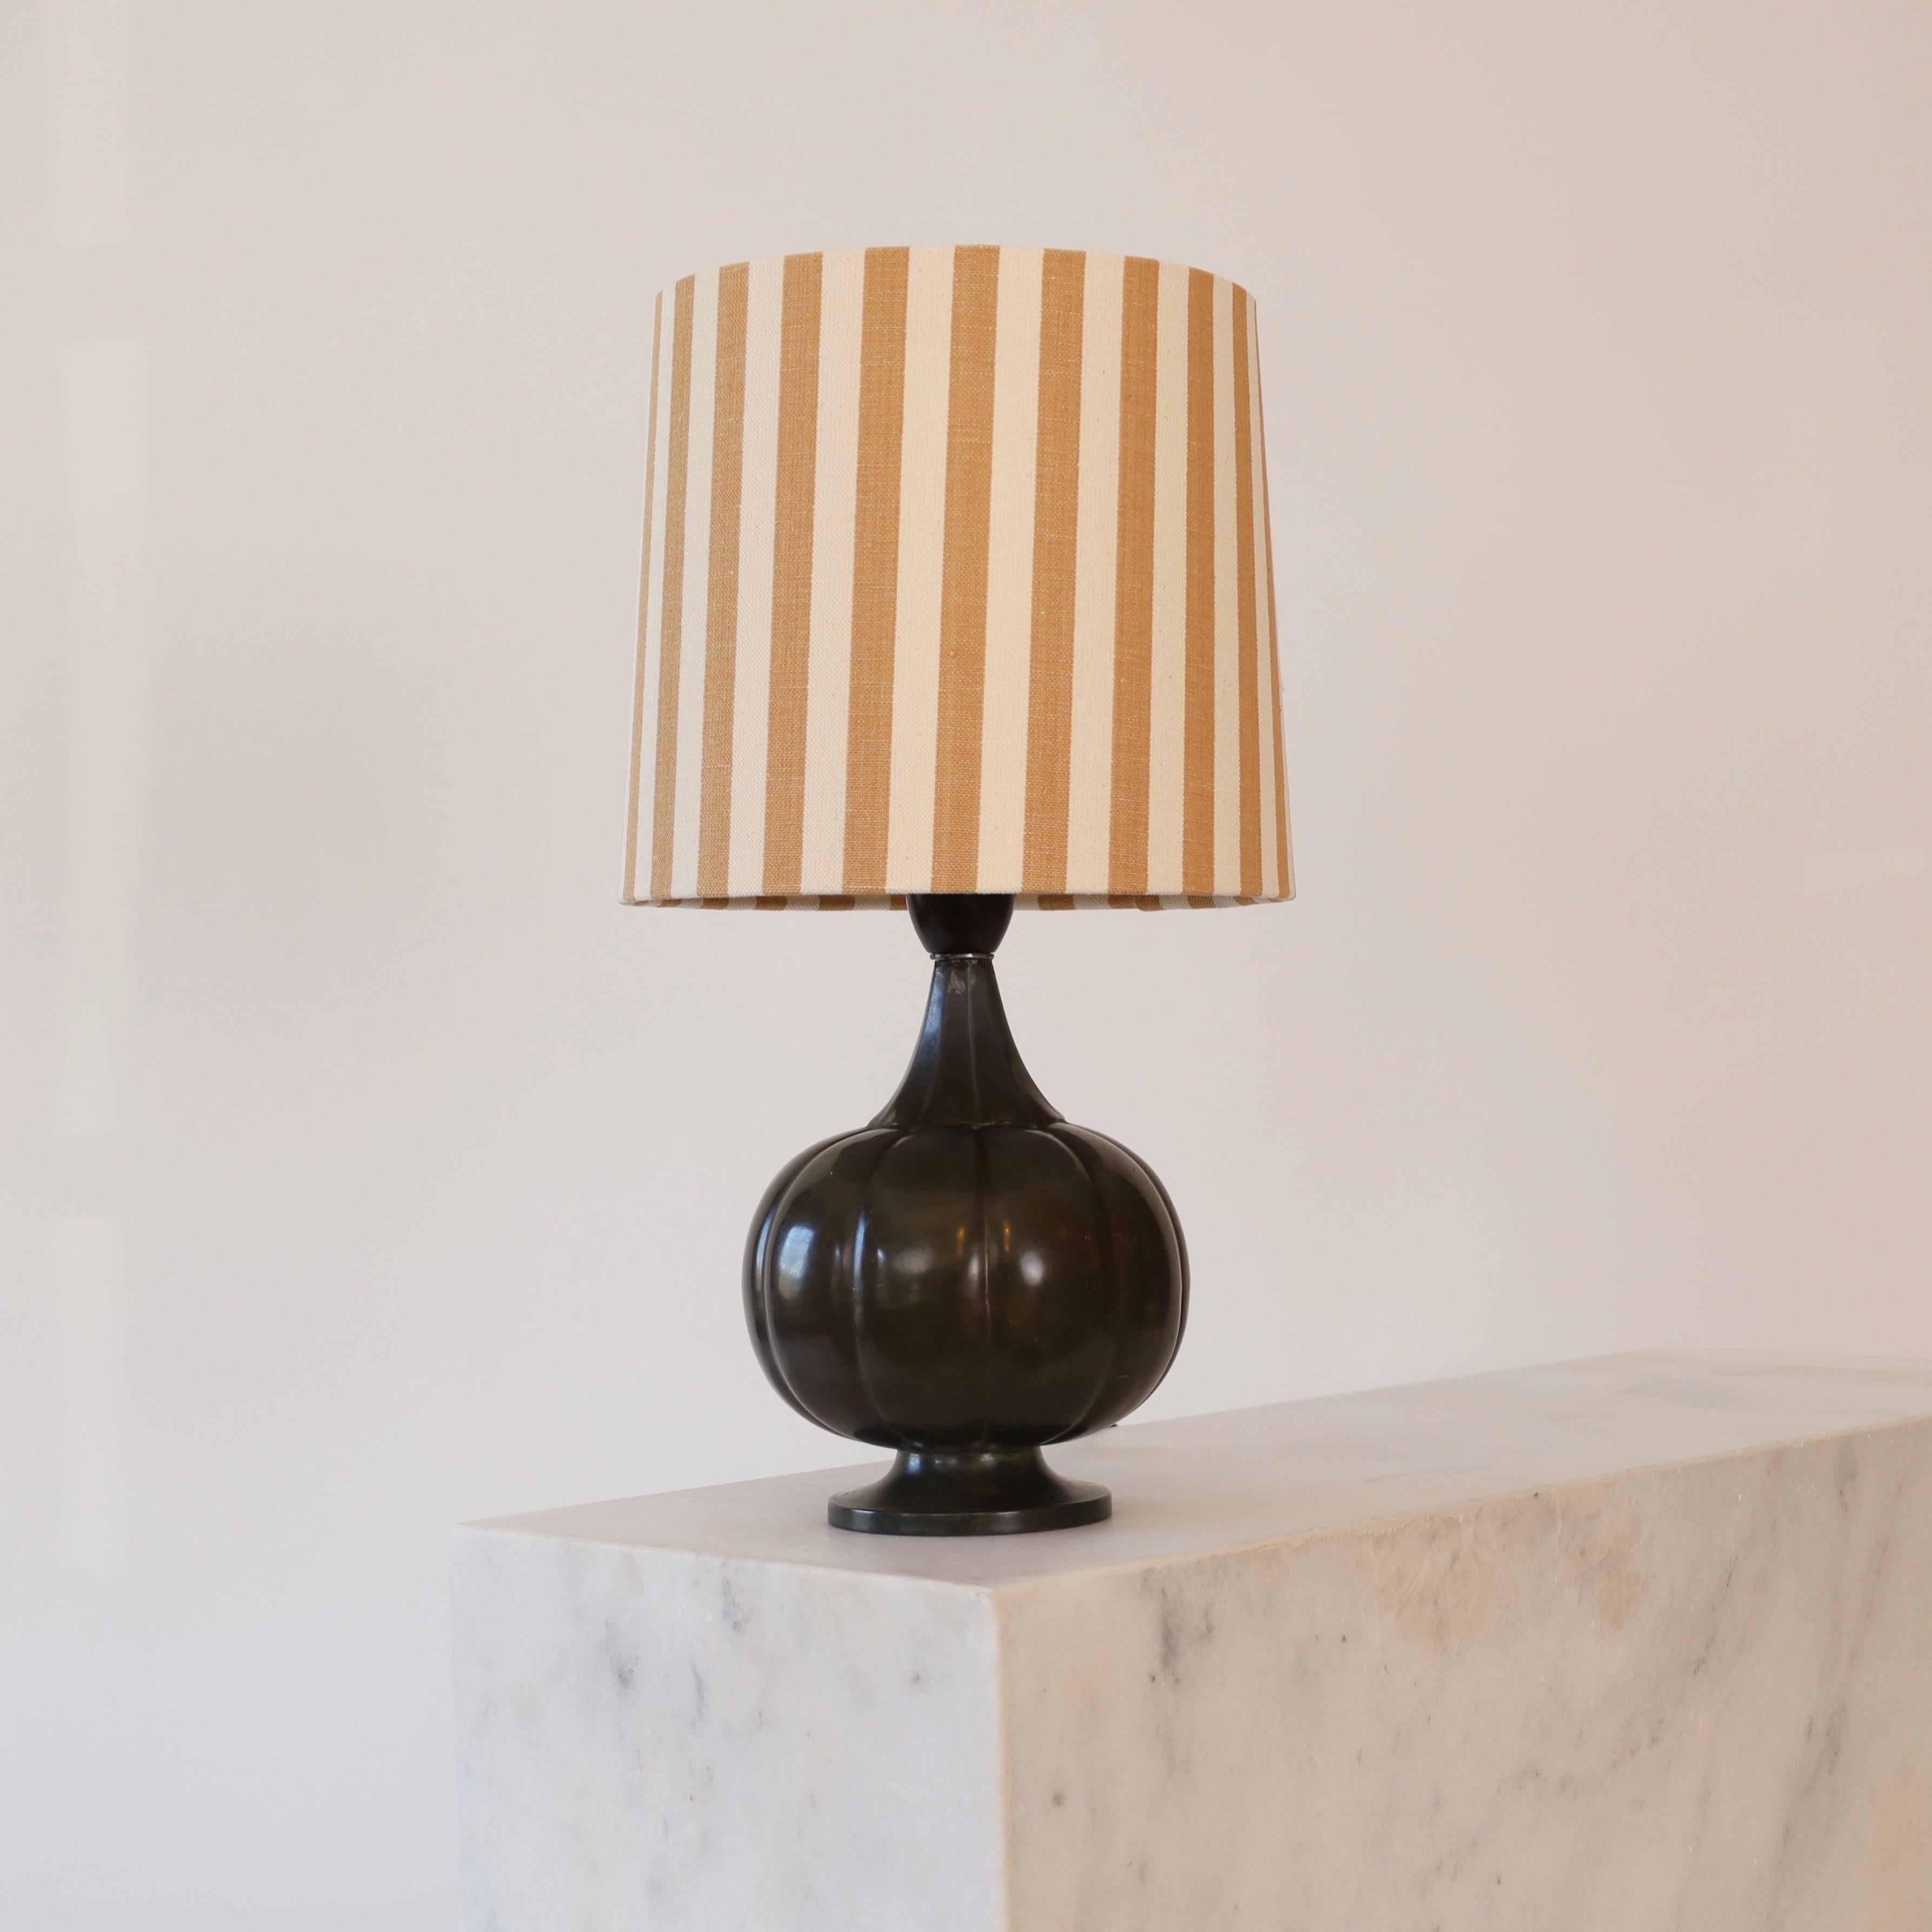 A pumpkin-shaped table lamp designed by Just Andersen in the late 1920s. A fine lamp for a beautiful home.

* Pumpkin-shaped metal table lamp on foot with a fabric shade with cognac-coloured stripes.
* Model: 1273 (stamped ‘Just 1273’)
* Year: